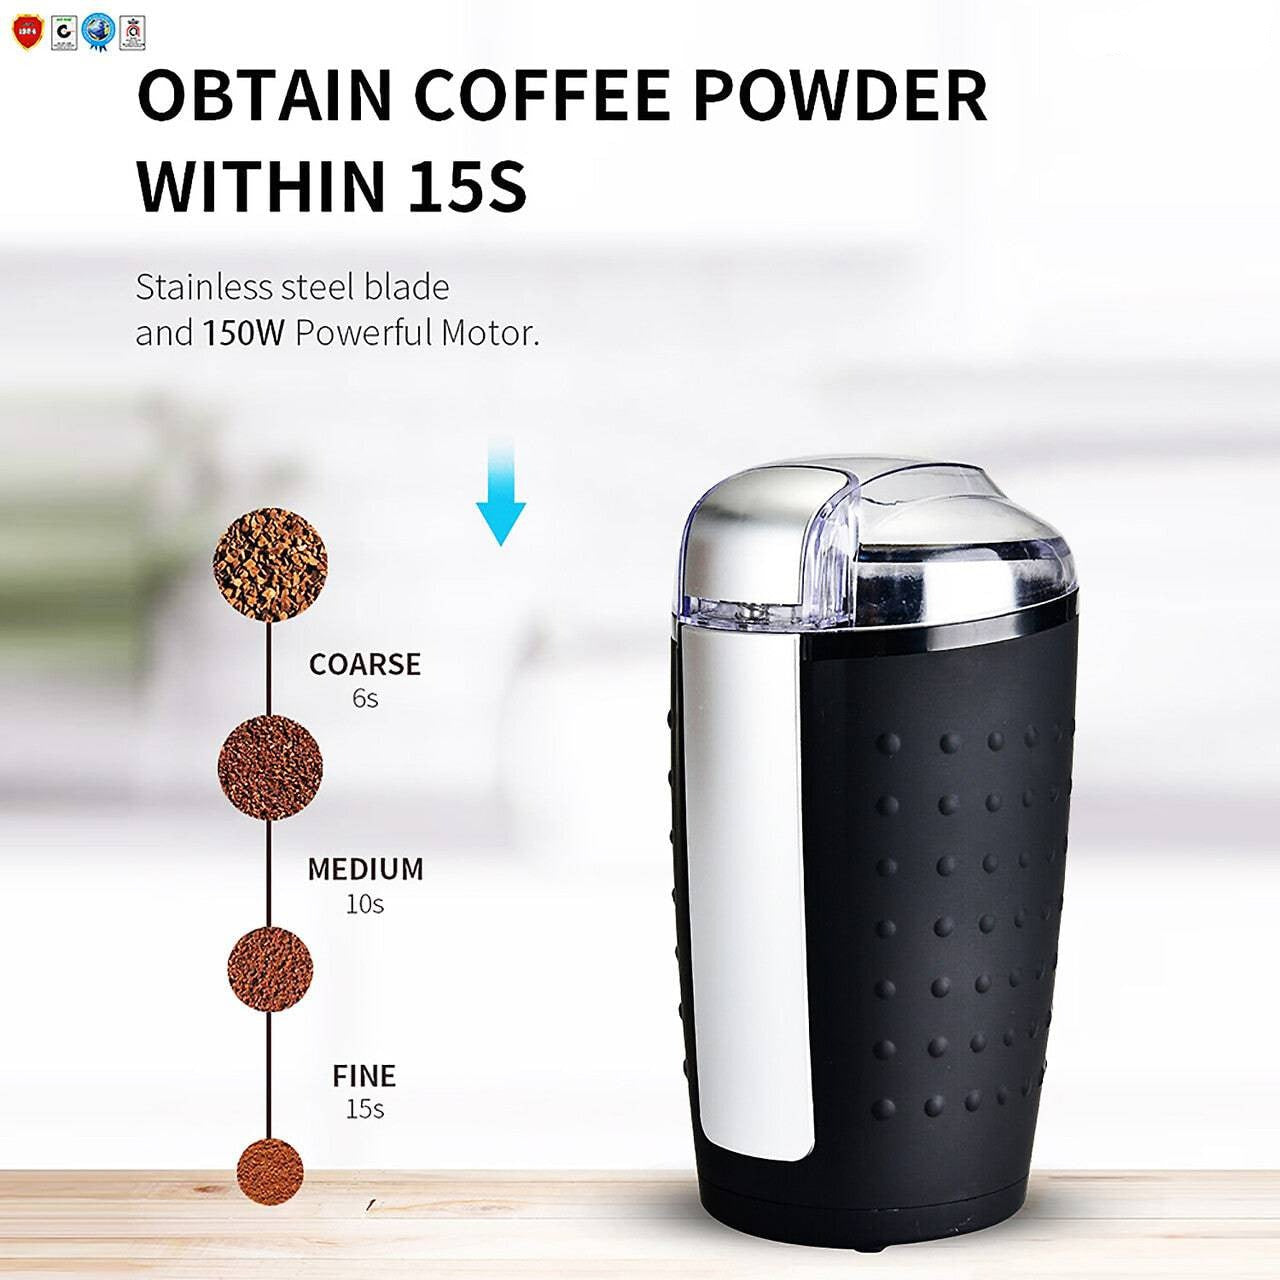 5Core Electric Coffee Grinder -Stainless Steel -4.5oz Capacity with Easy On/Off 5 Core CG 01 Black & Brown - KME means the very best